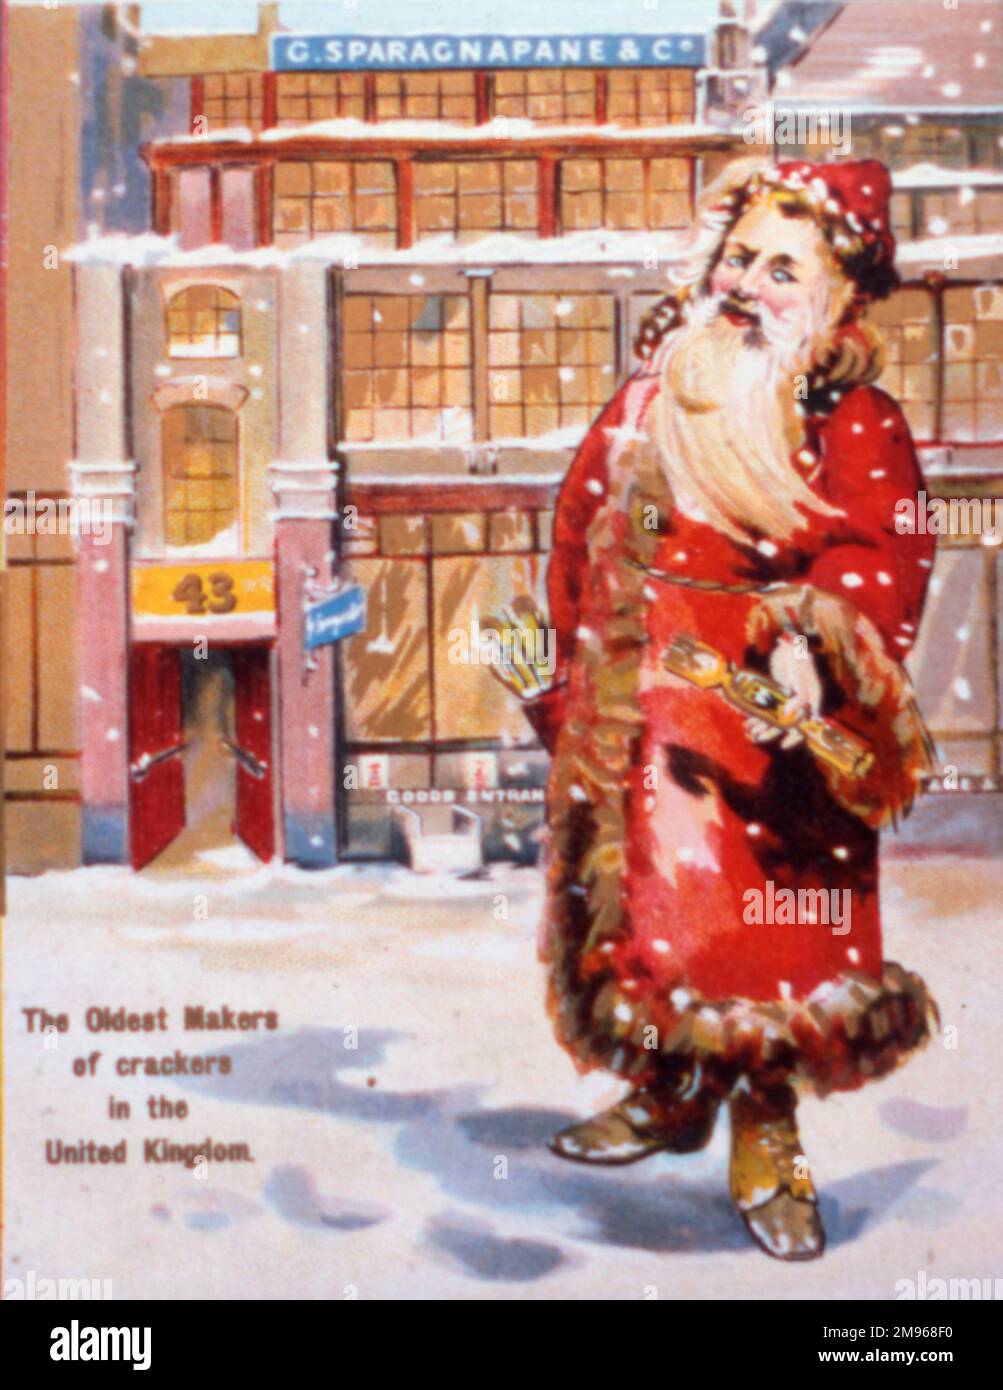 Advertisement for Sparagnapane's Christmas crackers, claiming to the oldest manufacturer of crackers in the United Kingdom, a fact confirmed by Father Christmas who stands in the snow pointing out their offices in London.